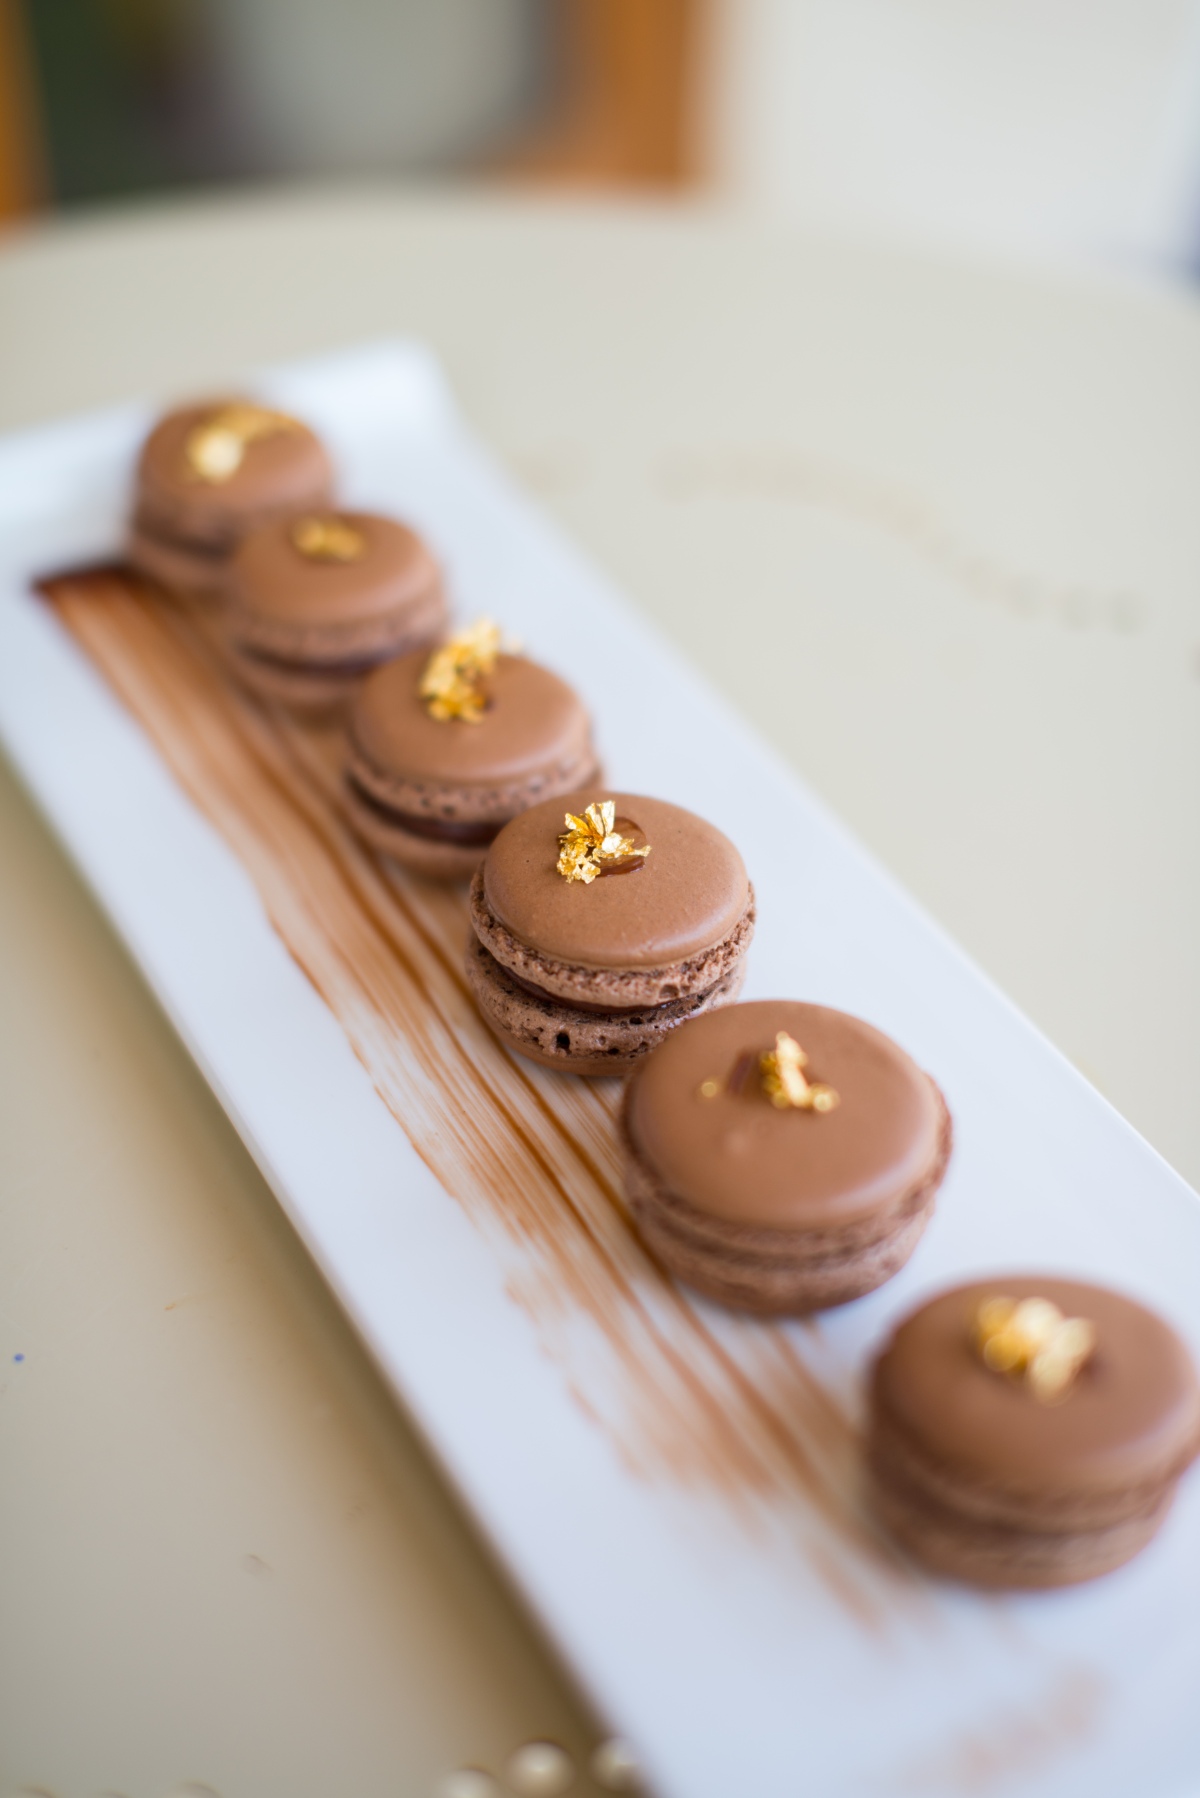 Le Calabash’s African Chocolate Macaron, Step by Step